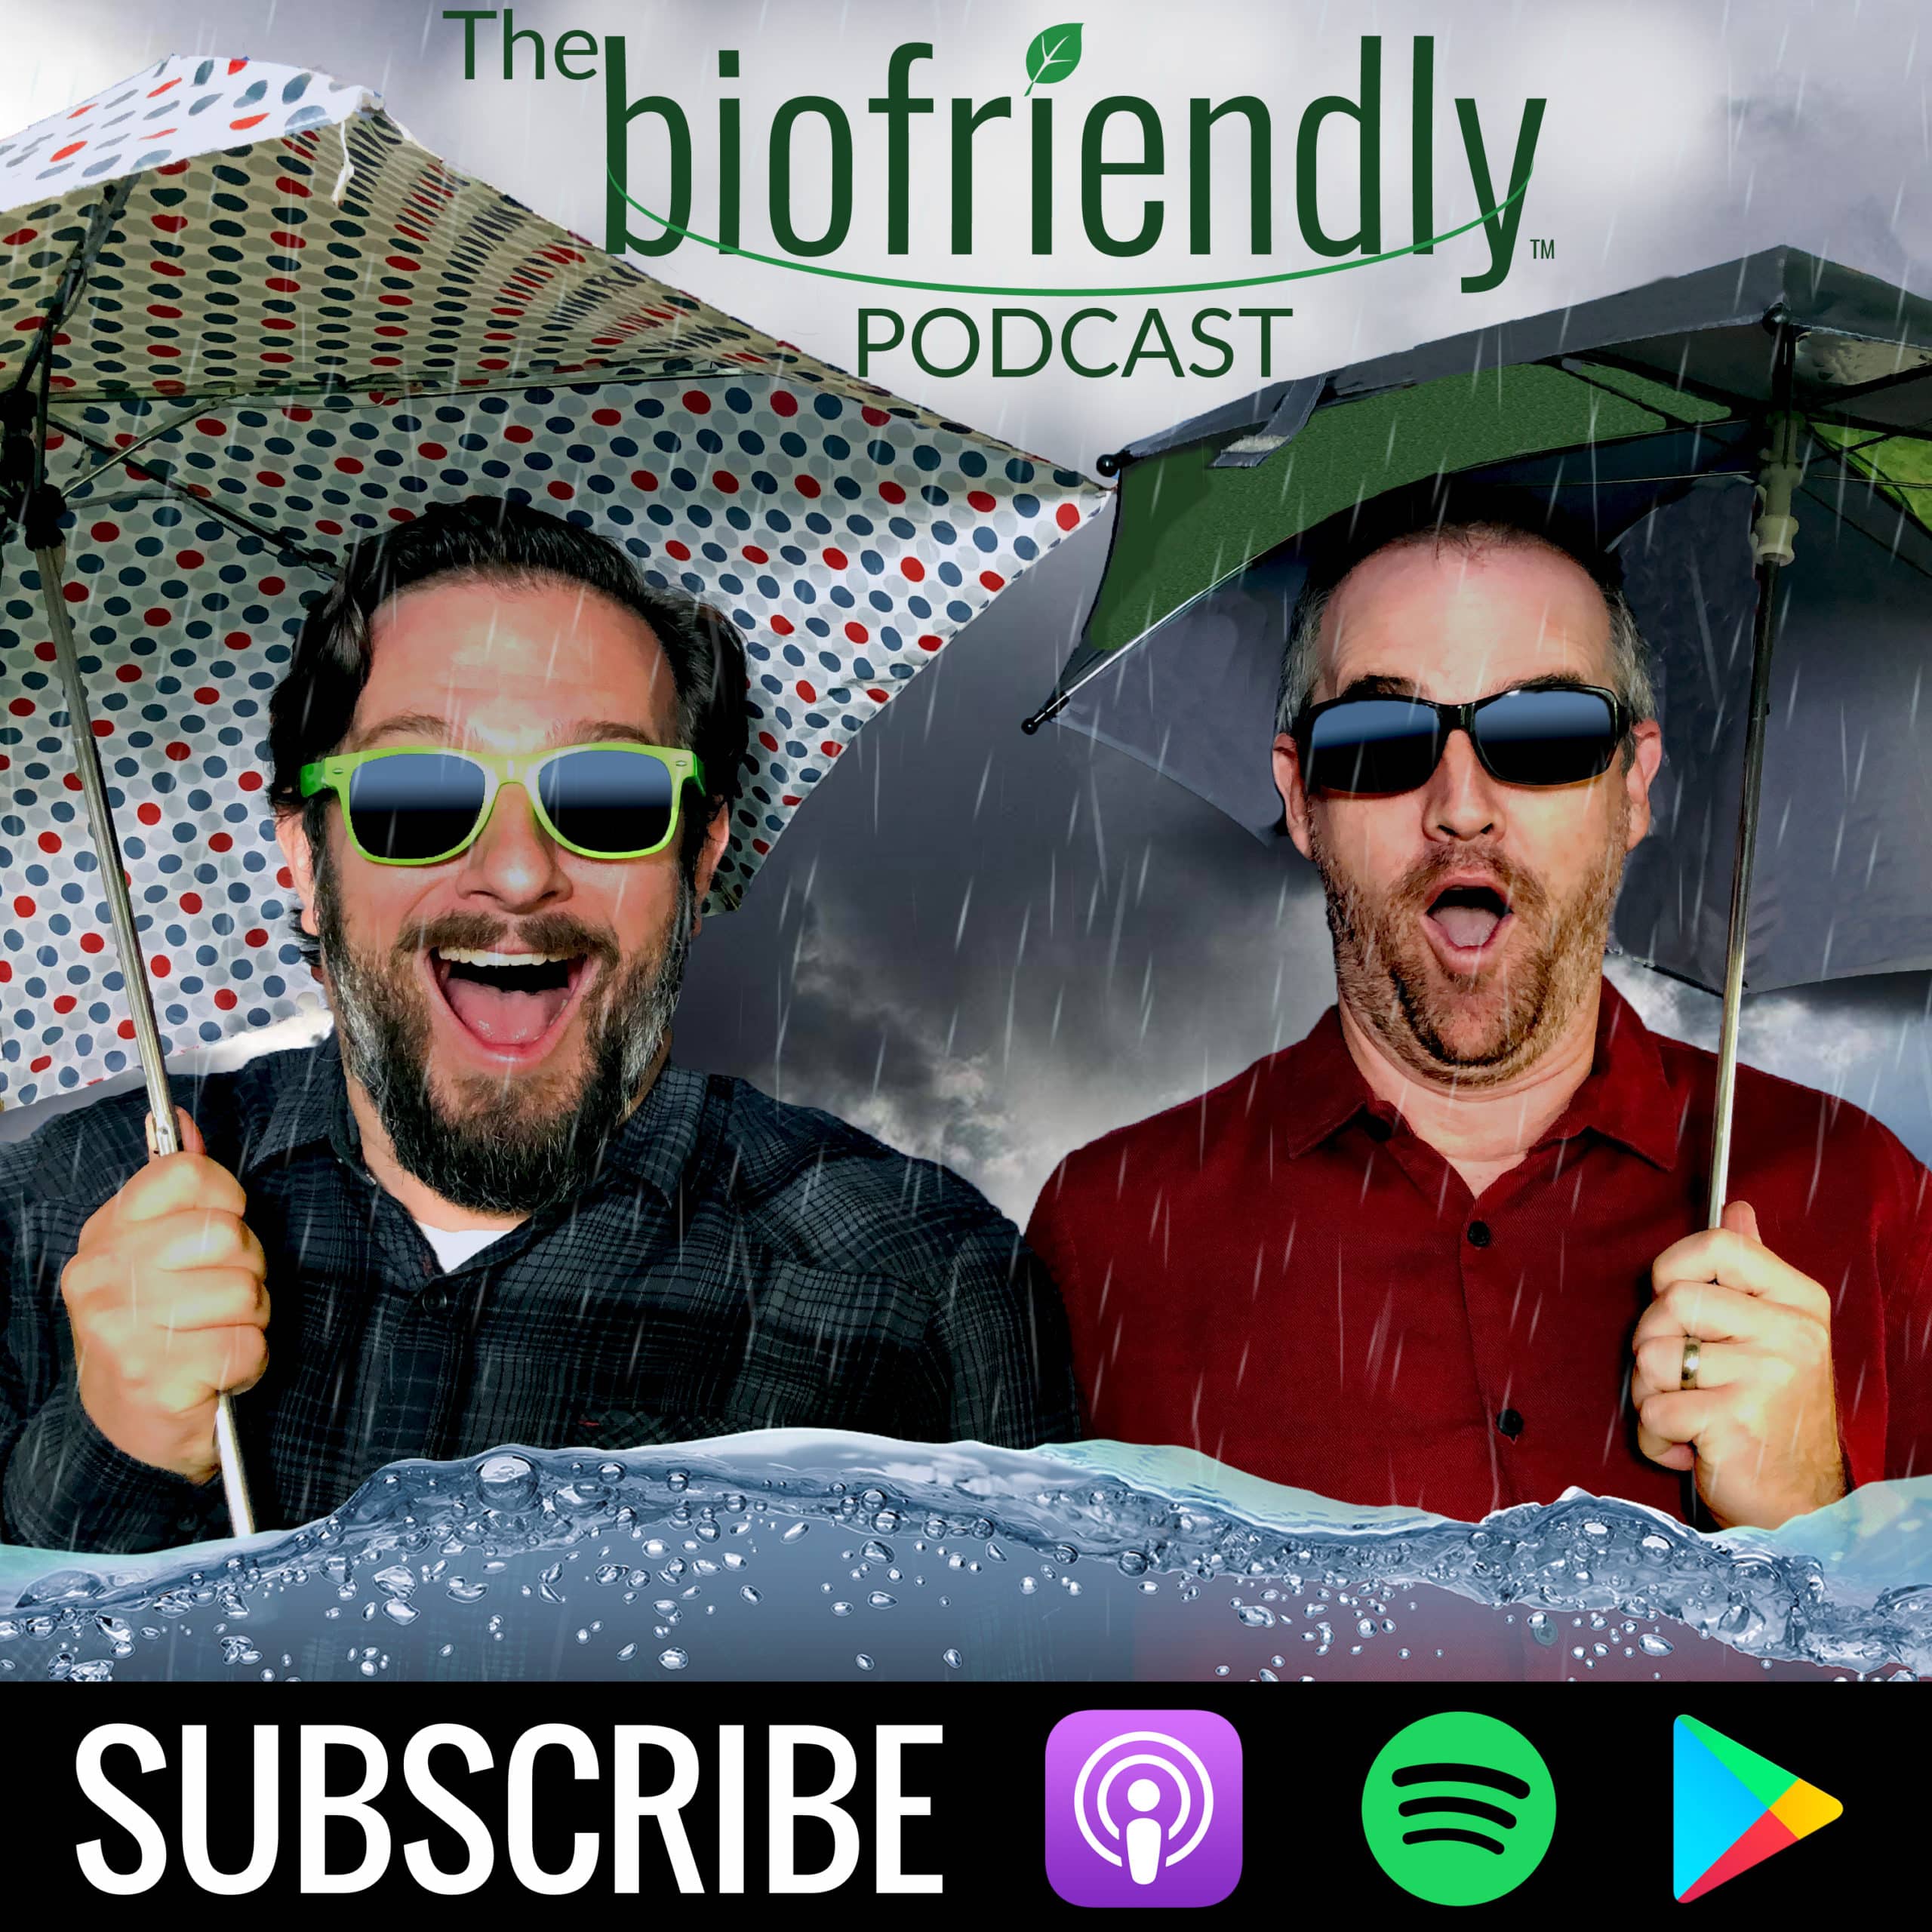 The Biofriendly Podcast - A beacon of light in a gloomy environment. Airs Thursdays and Mondays on iTunes, Spotify, Google Podcasts or iHeartRadio